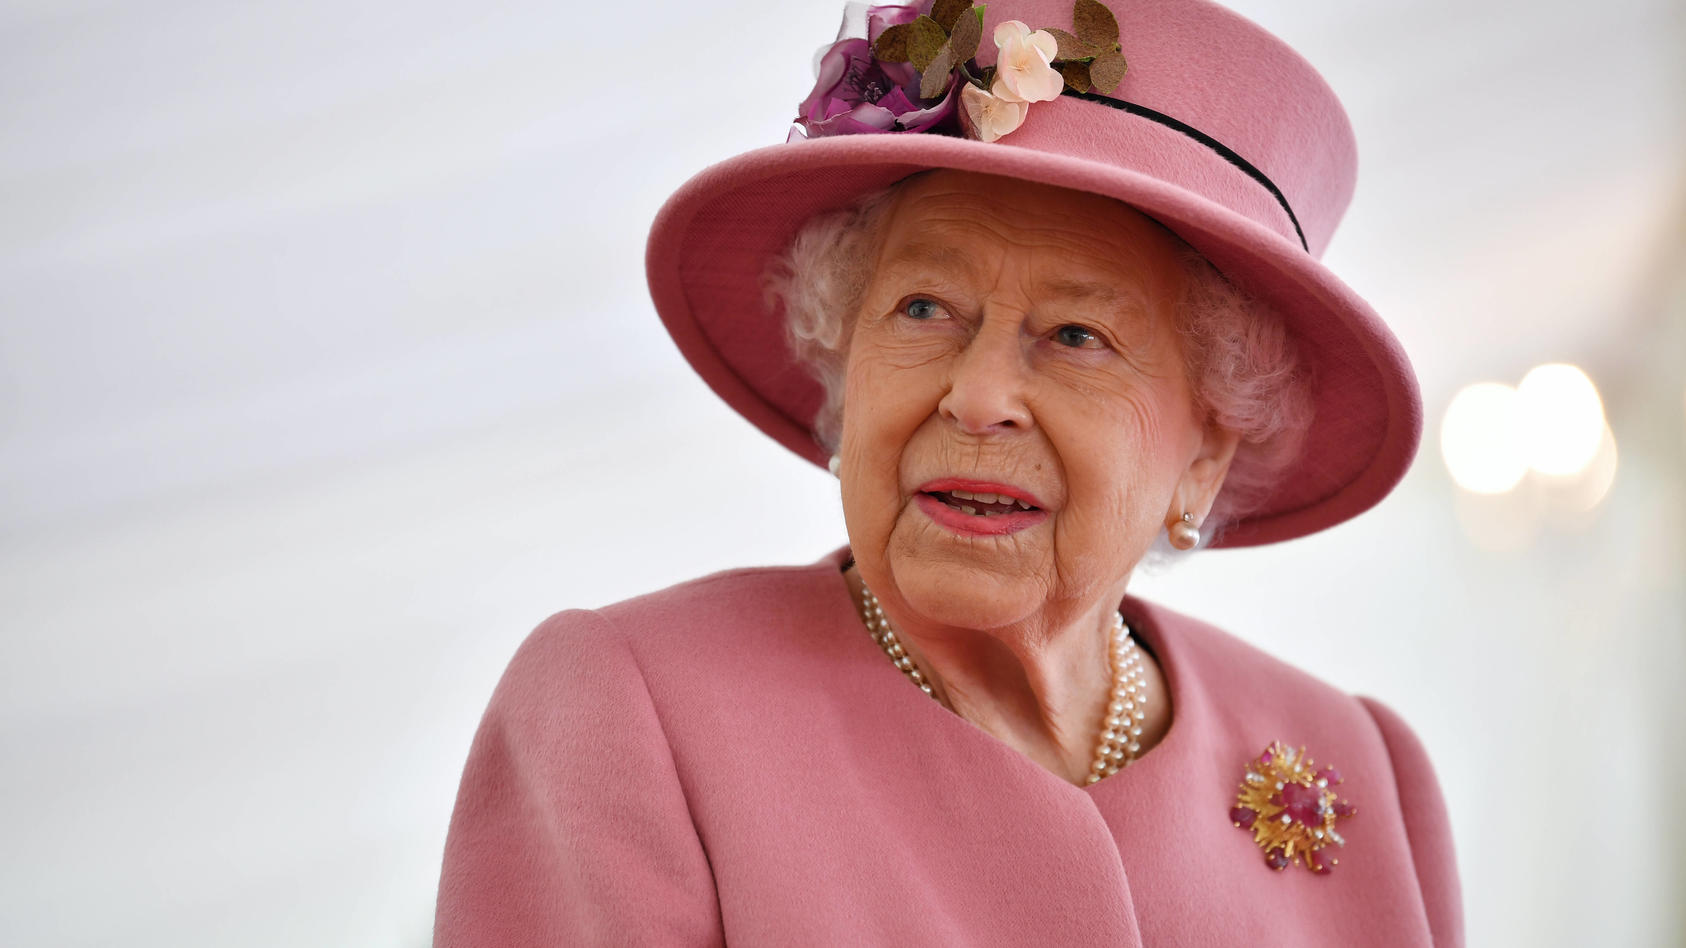 Entertainment Themen der Woche KW42 Entertainment Bilder des Tages . 15/10/2020. Salisbury, United Kingdom. Queen Elizabeth II during a visit to the Defence Science and Technology Laboratory in Porton Down, near Salisbury,United Kingdom. PUBLICATIONx